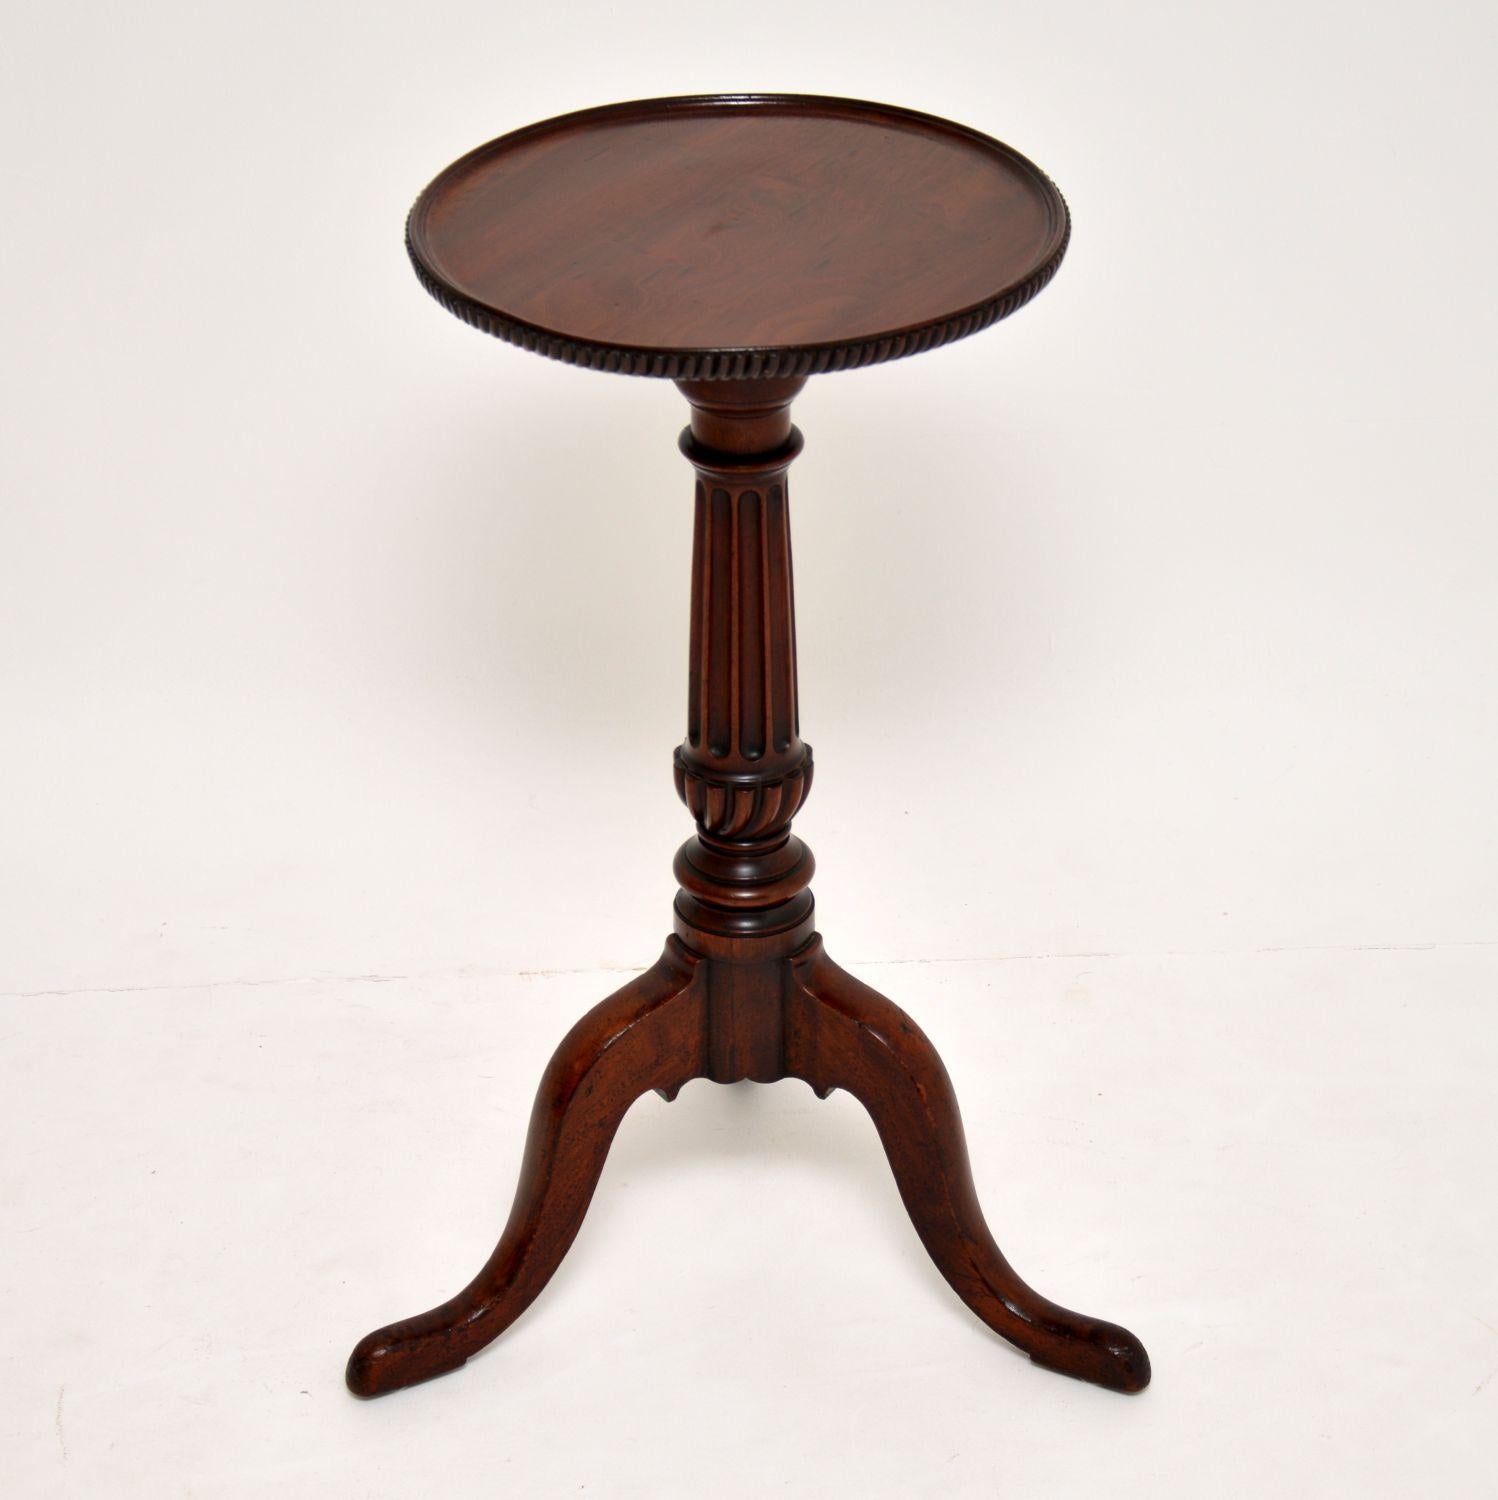 This solid mahogany Chippendale style wine table is antique Victorian, dating from circa 1880s period and is superb quality.

Please enlarge all the images to see the carved top rope edge and the turned fluted stem with the twist at the base,